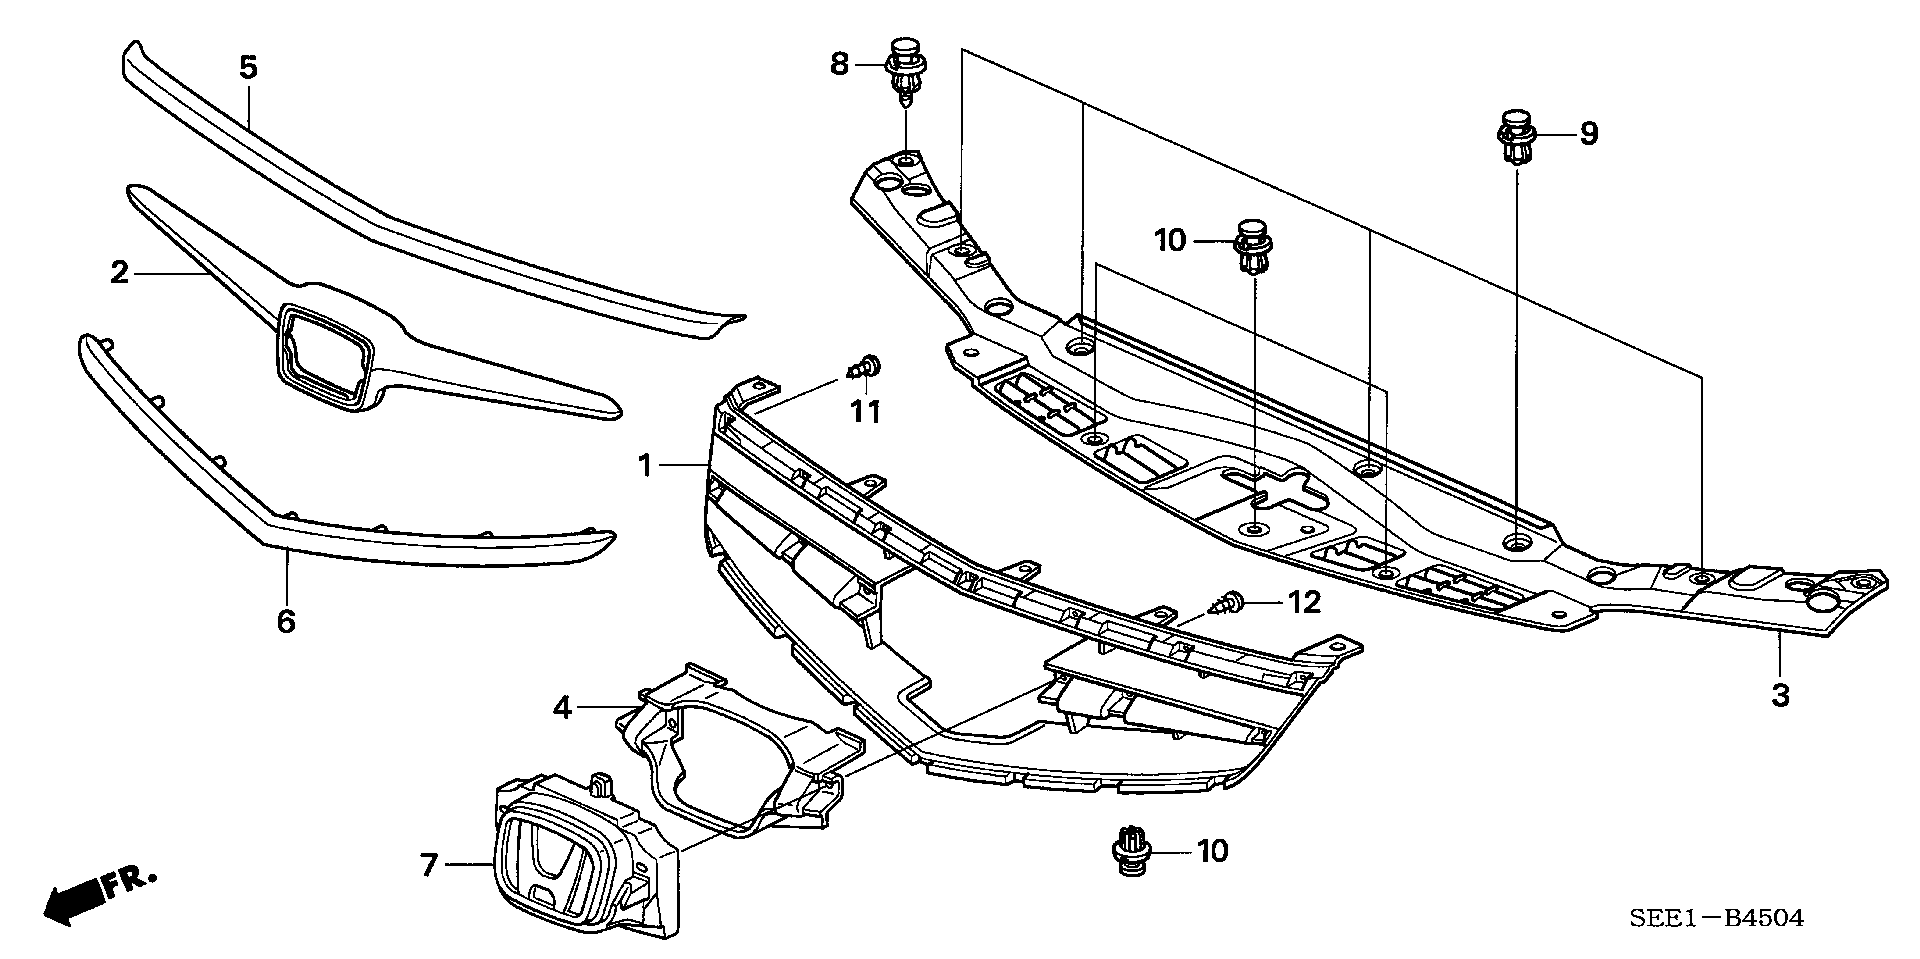 FRONT GRILLE(5)